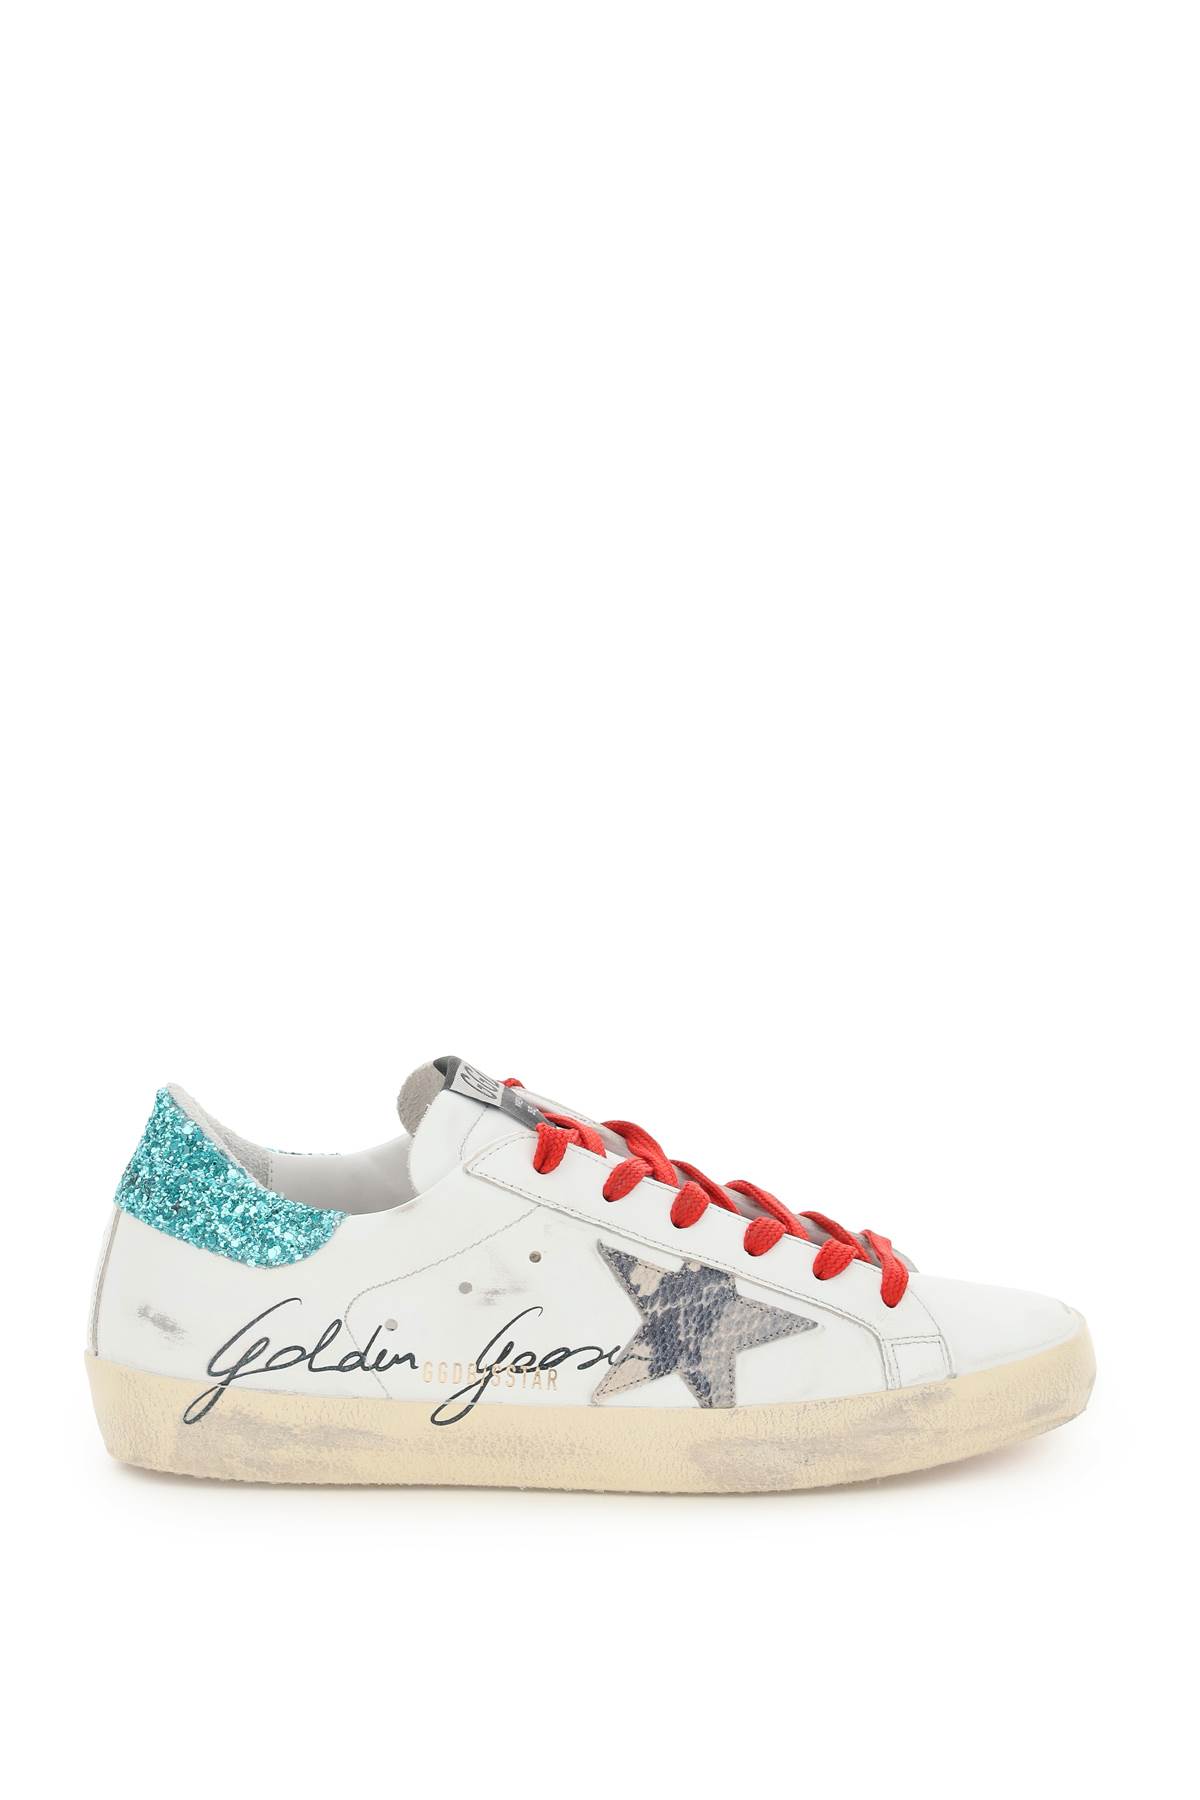 Golden Goose Super Star Sneakers With Print